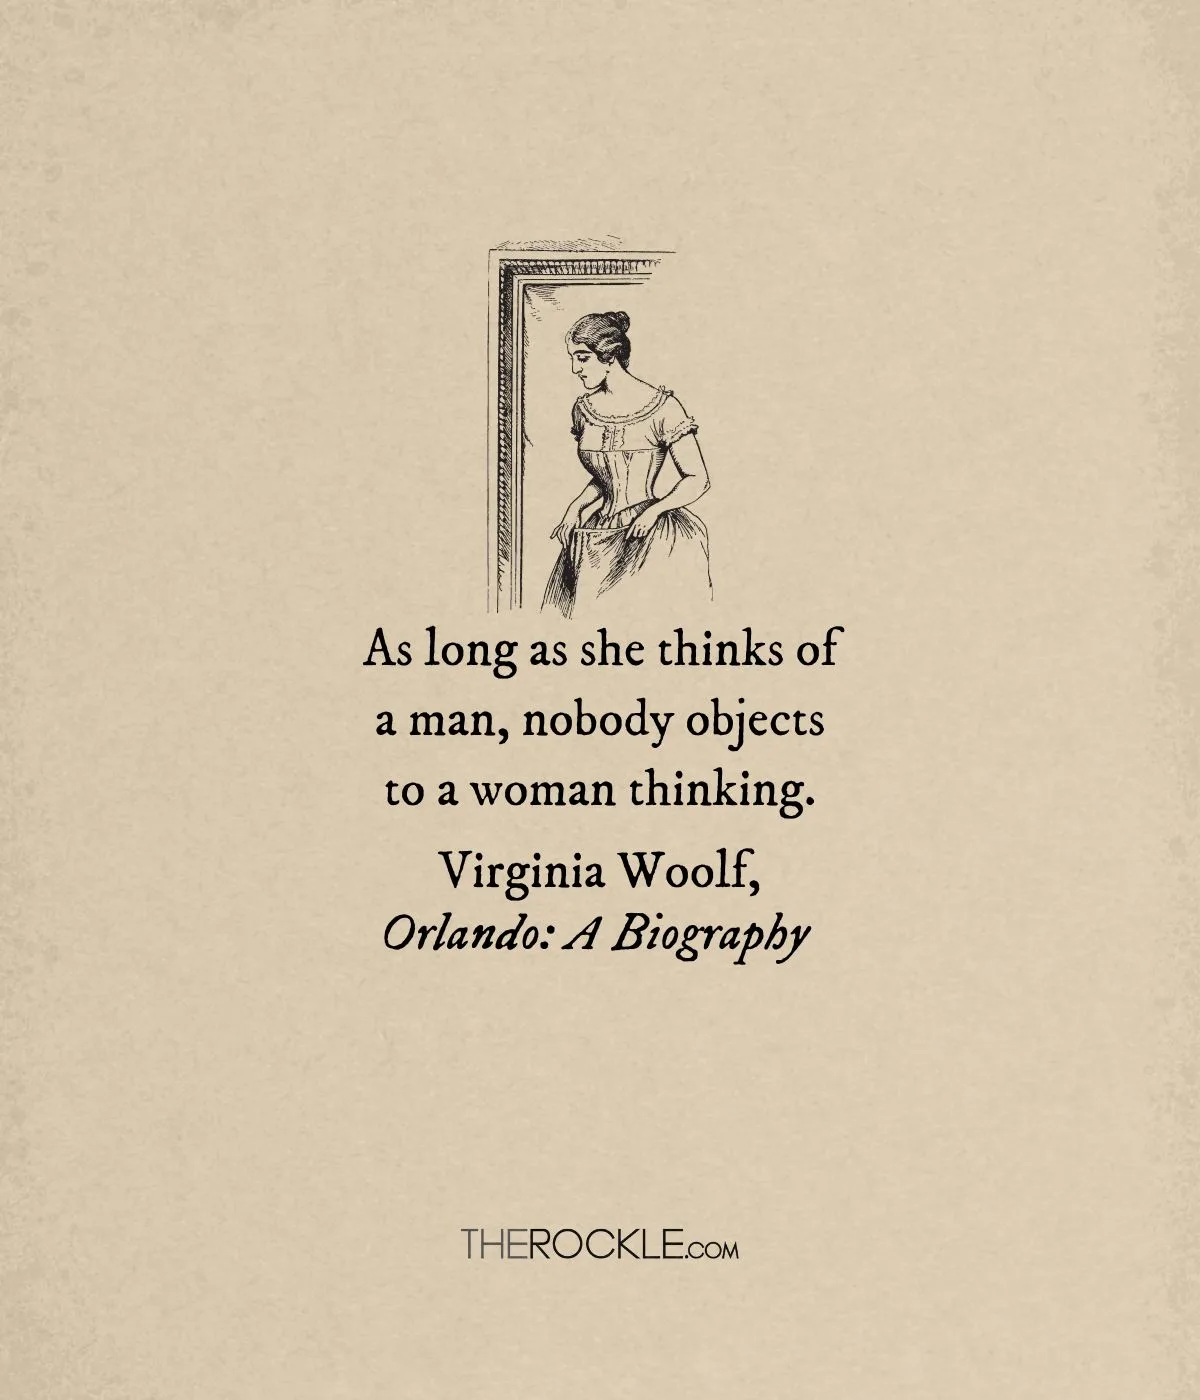 Virginia Woolf quote on gender expectations